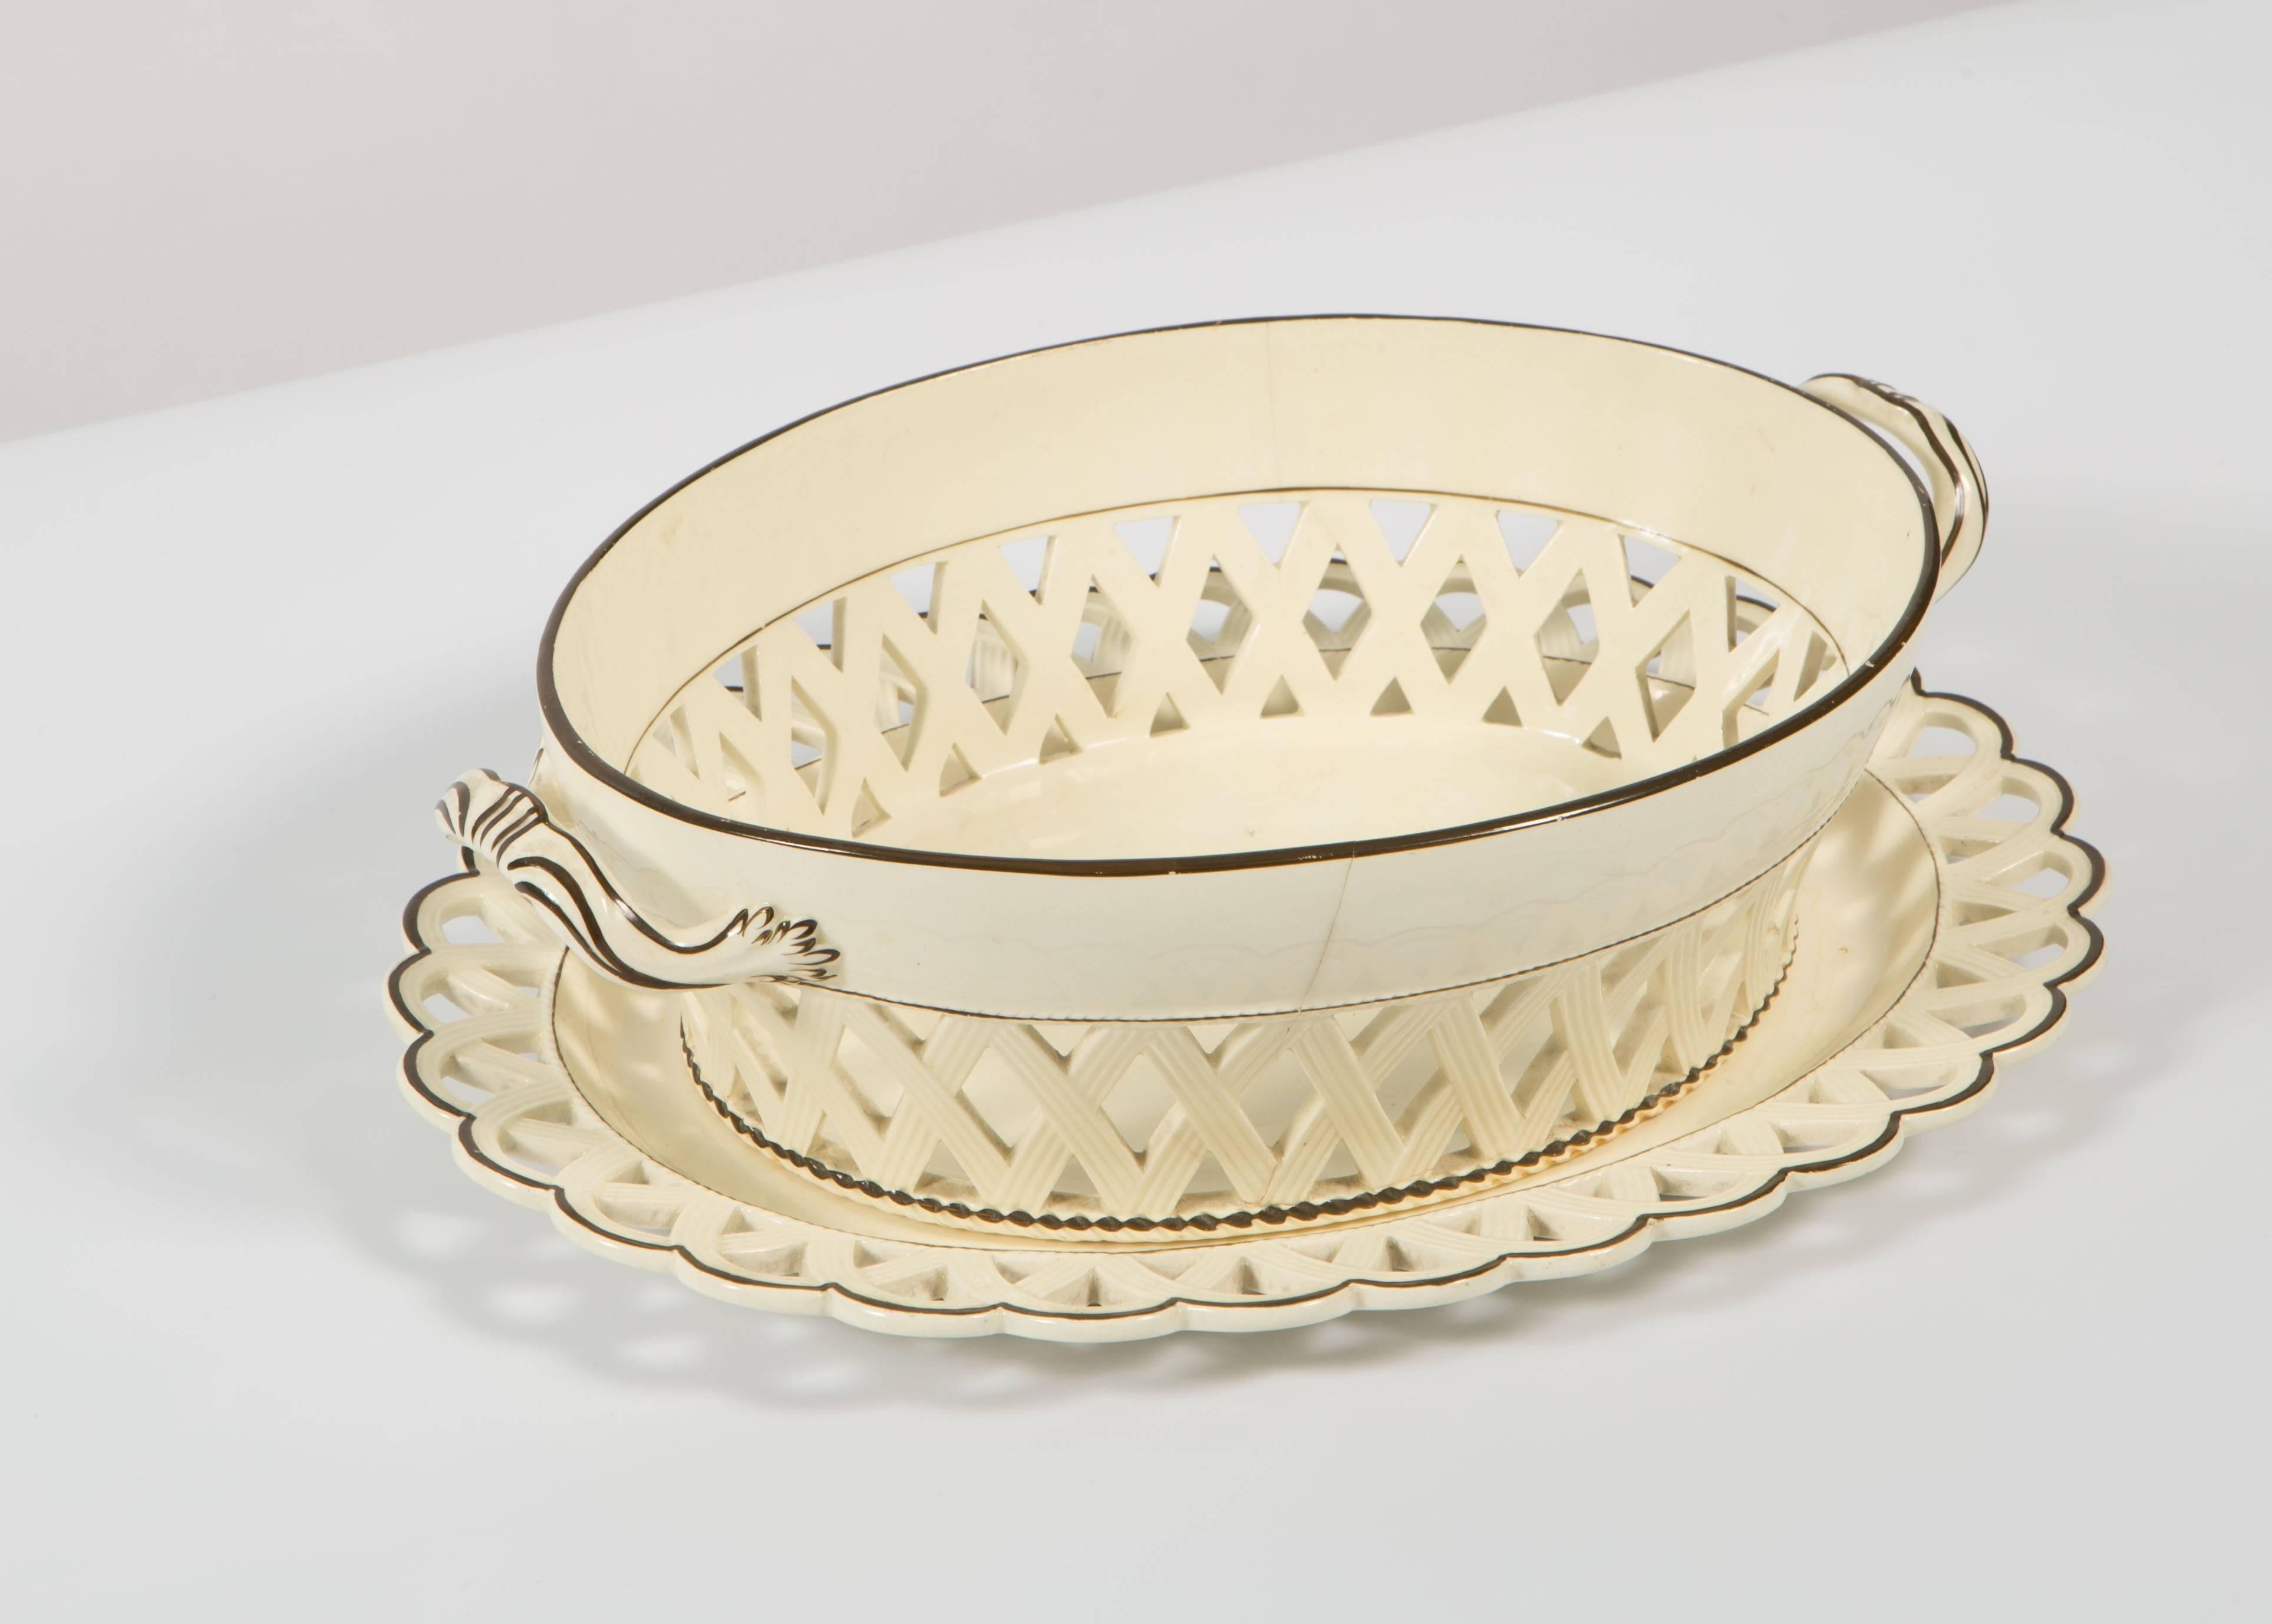 This is a 19th century cream ware bowl with brown accents on the bowl and the under plate. The bowl has a lattice design below the rim. The under plate has scalloped edging.